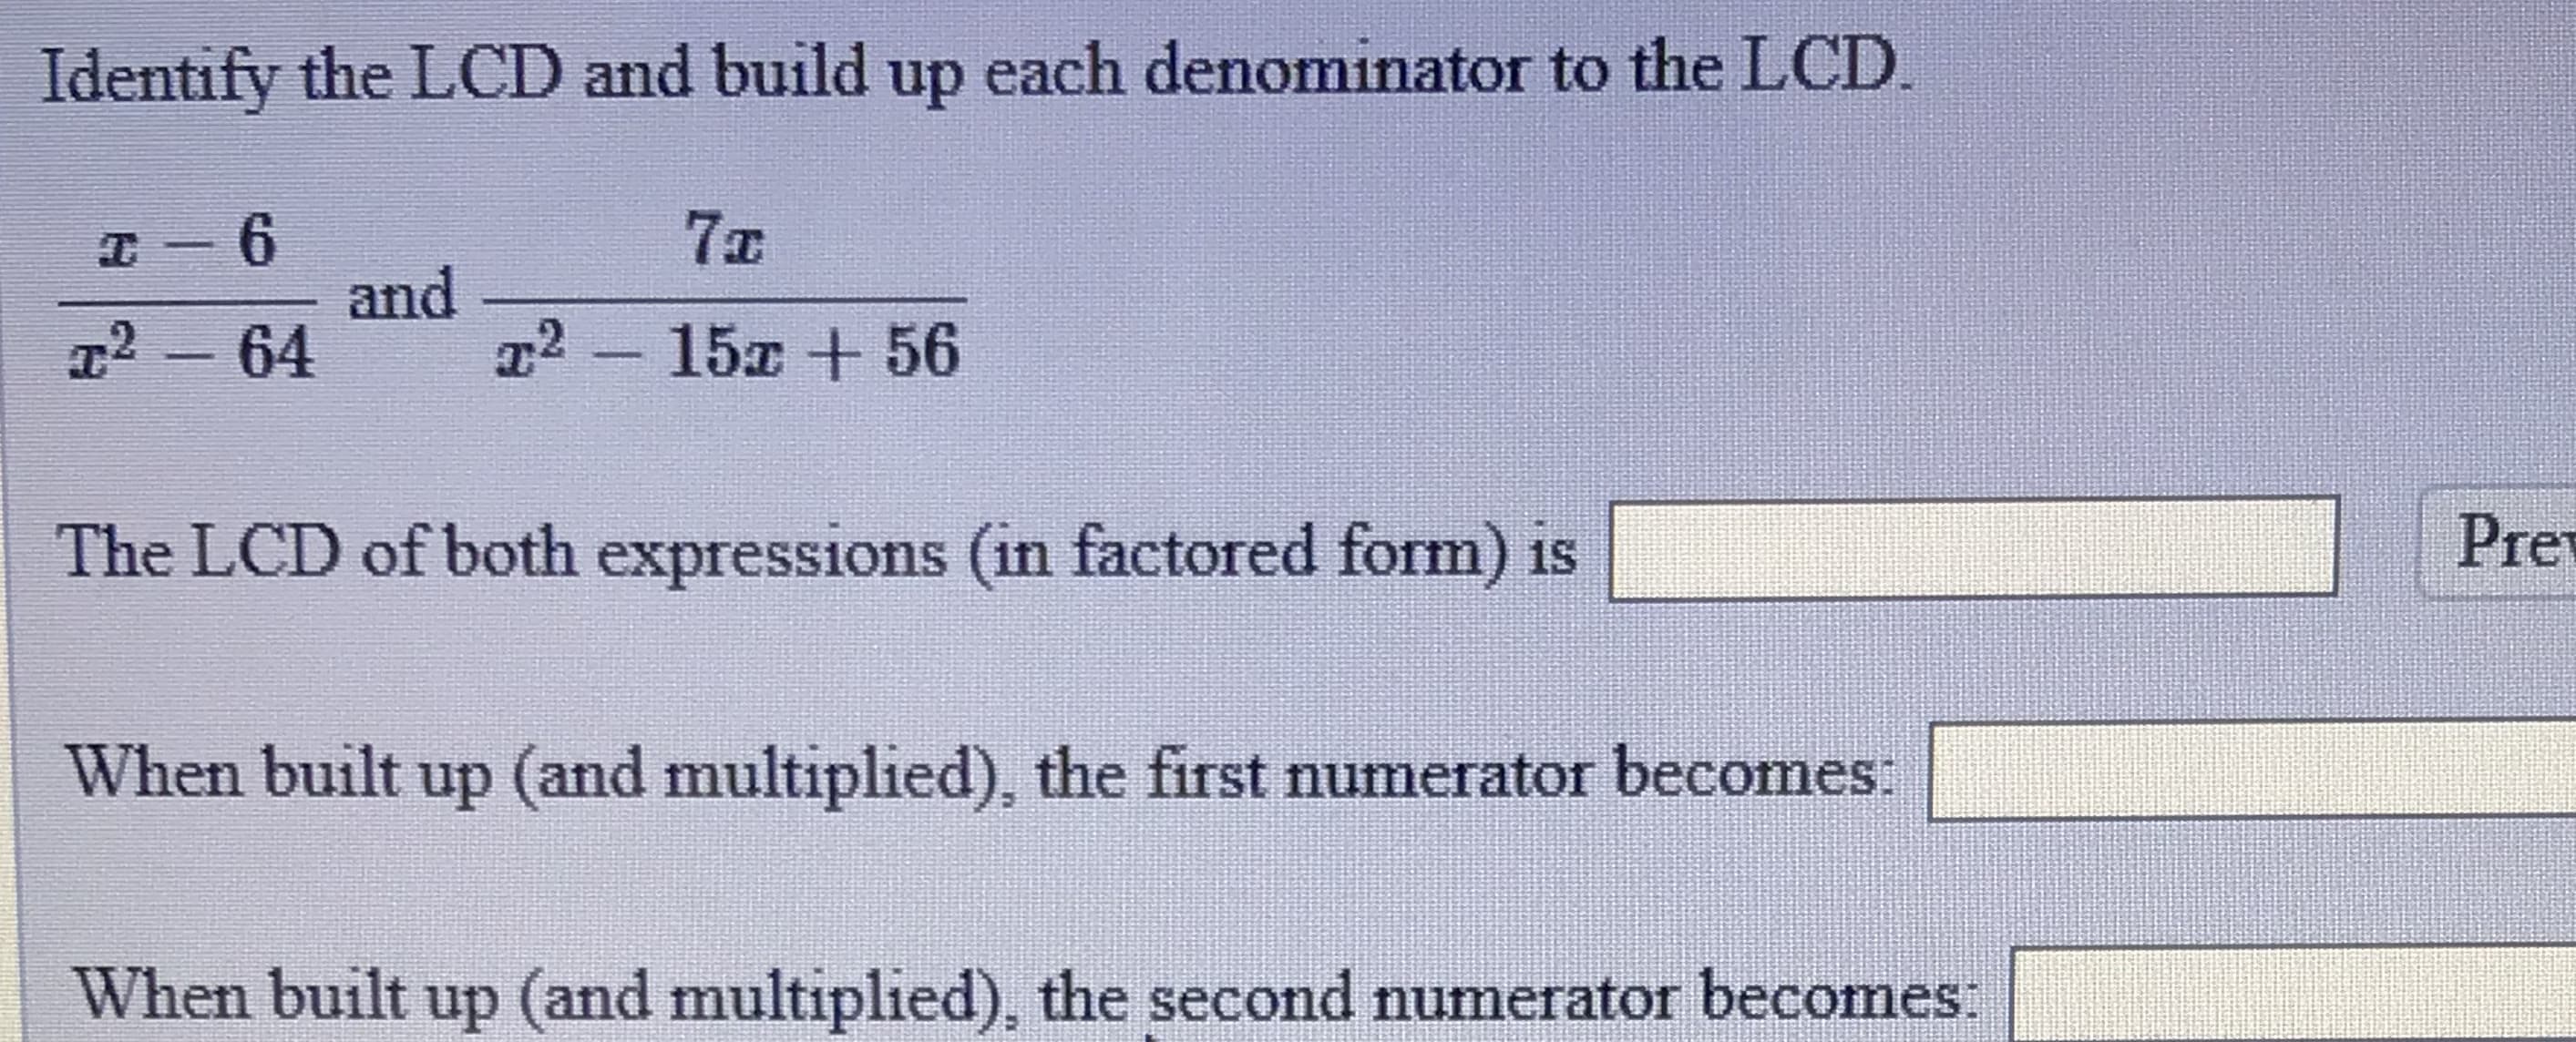 Identify the LCD and build up each denominator to the LCD.
7x
6.
and
22-15 +56
T2-64
The LCD of both expressions (in factored form) is
Prev
When built up (and multiplied), the first numerator becomes:
When built up (and multiplied), the second numerator becomes:
